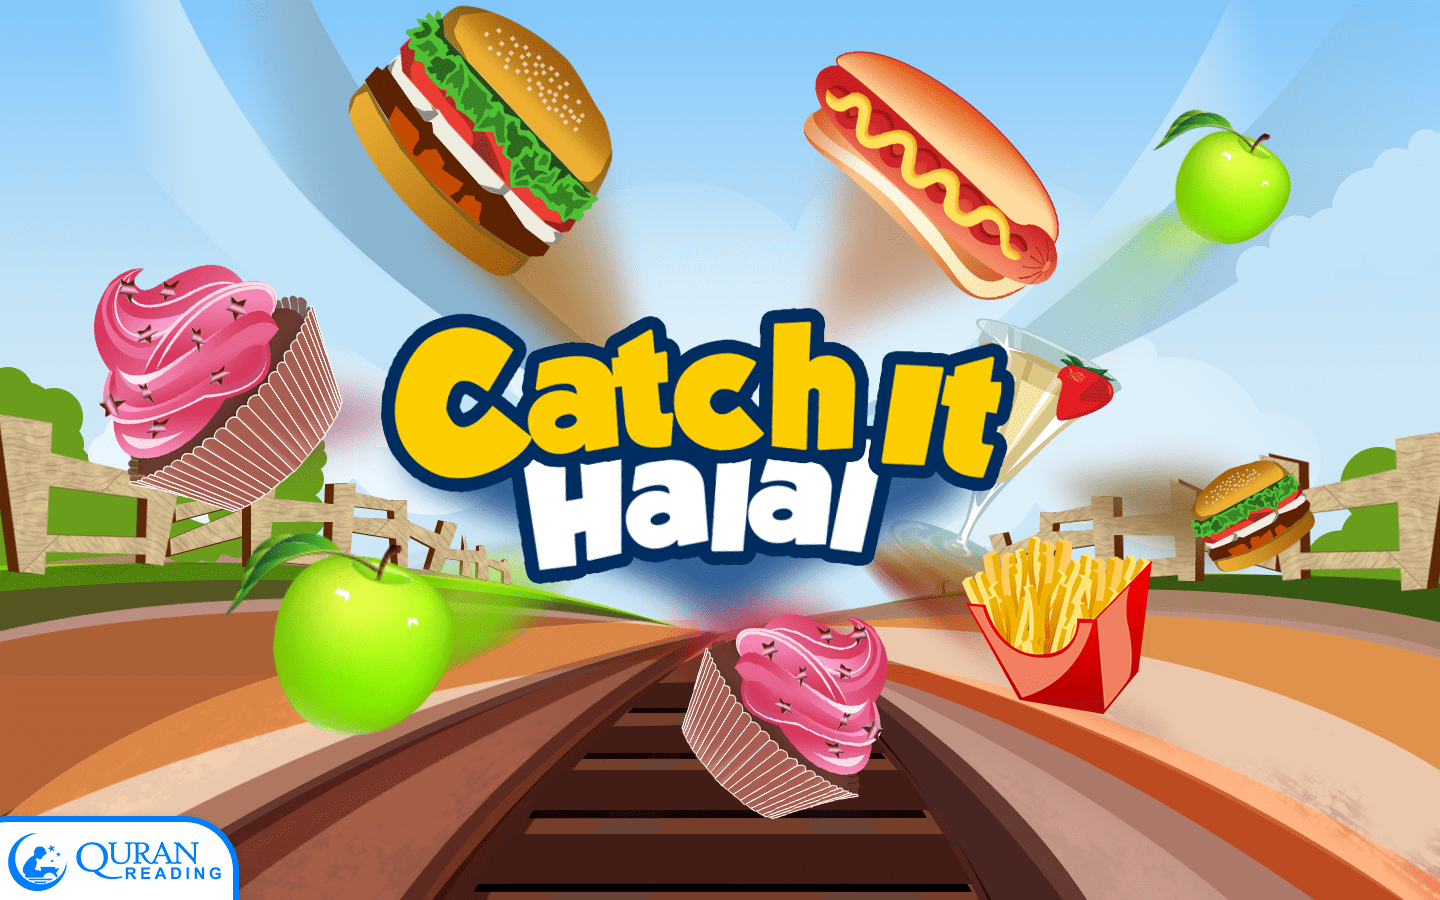 Catch It Halal Game– Catch Halal Food and Avoid Haram Items - Islamic